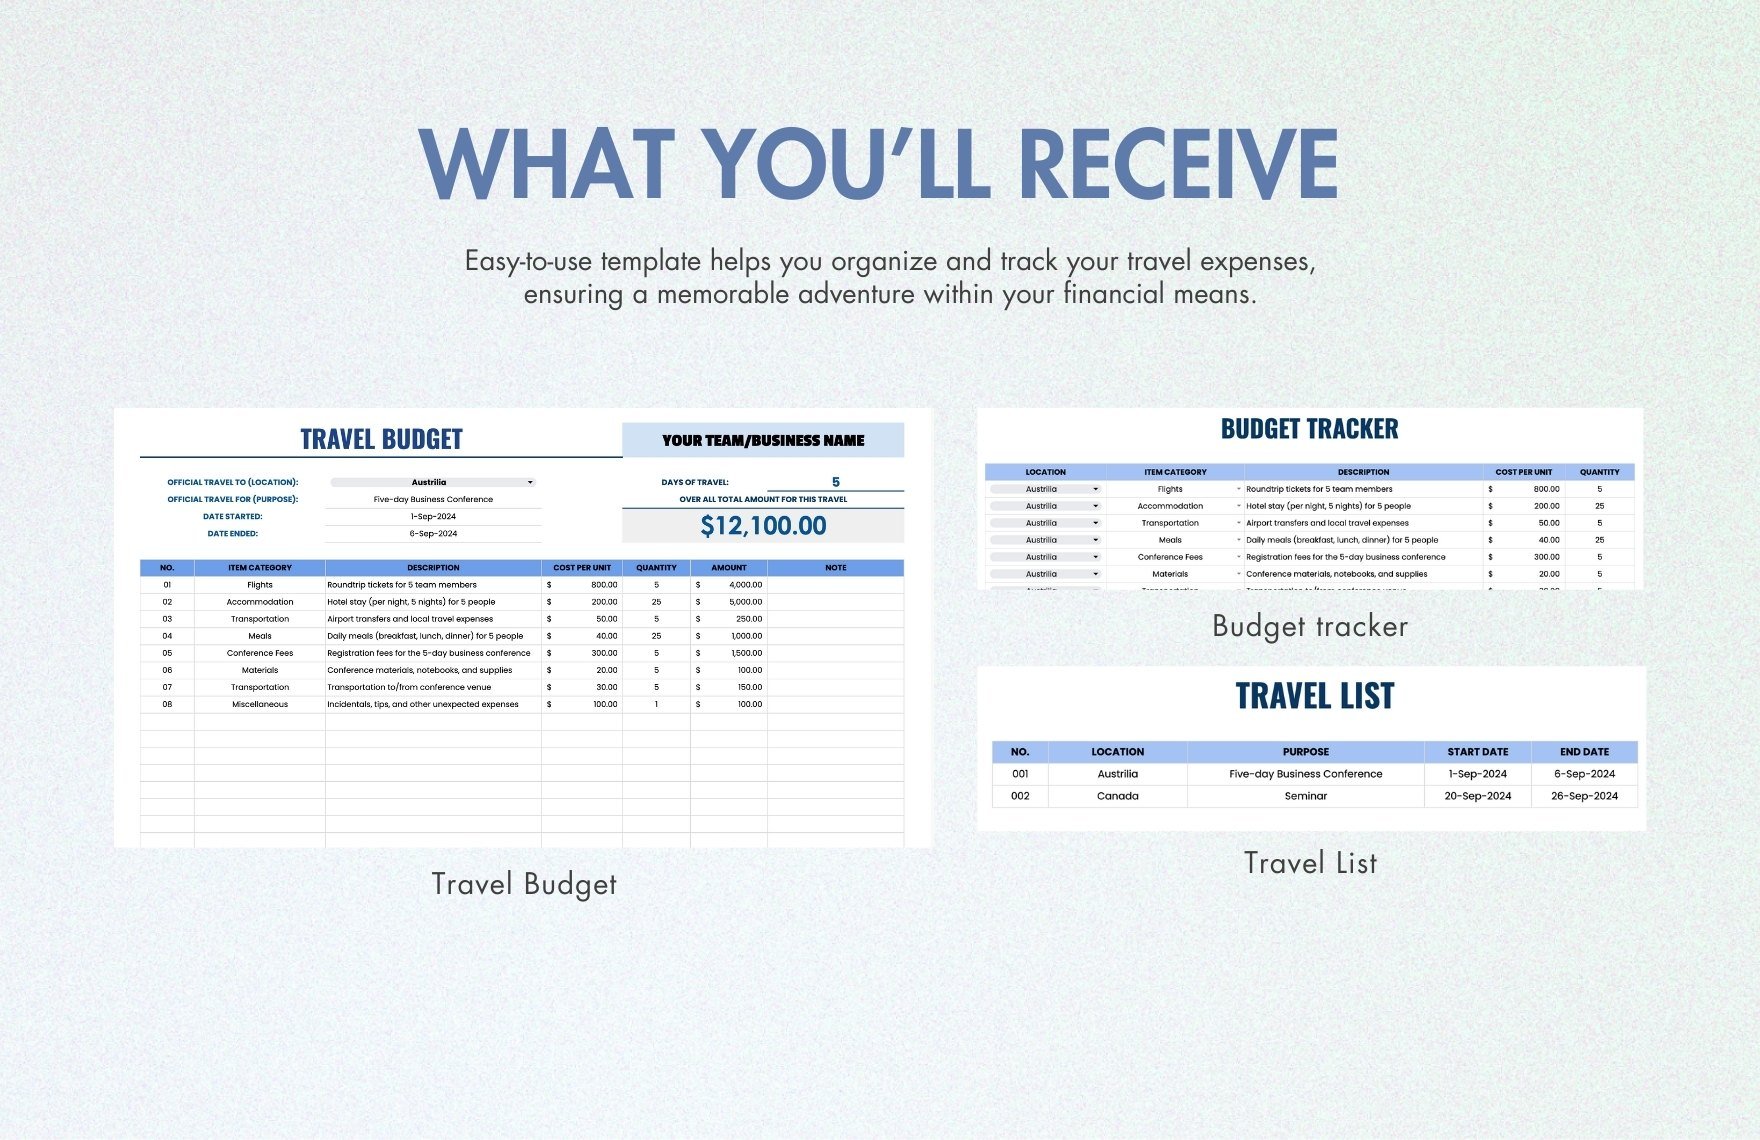 Travel Budget Template 